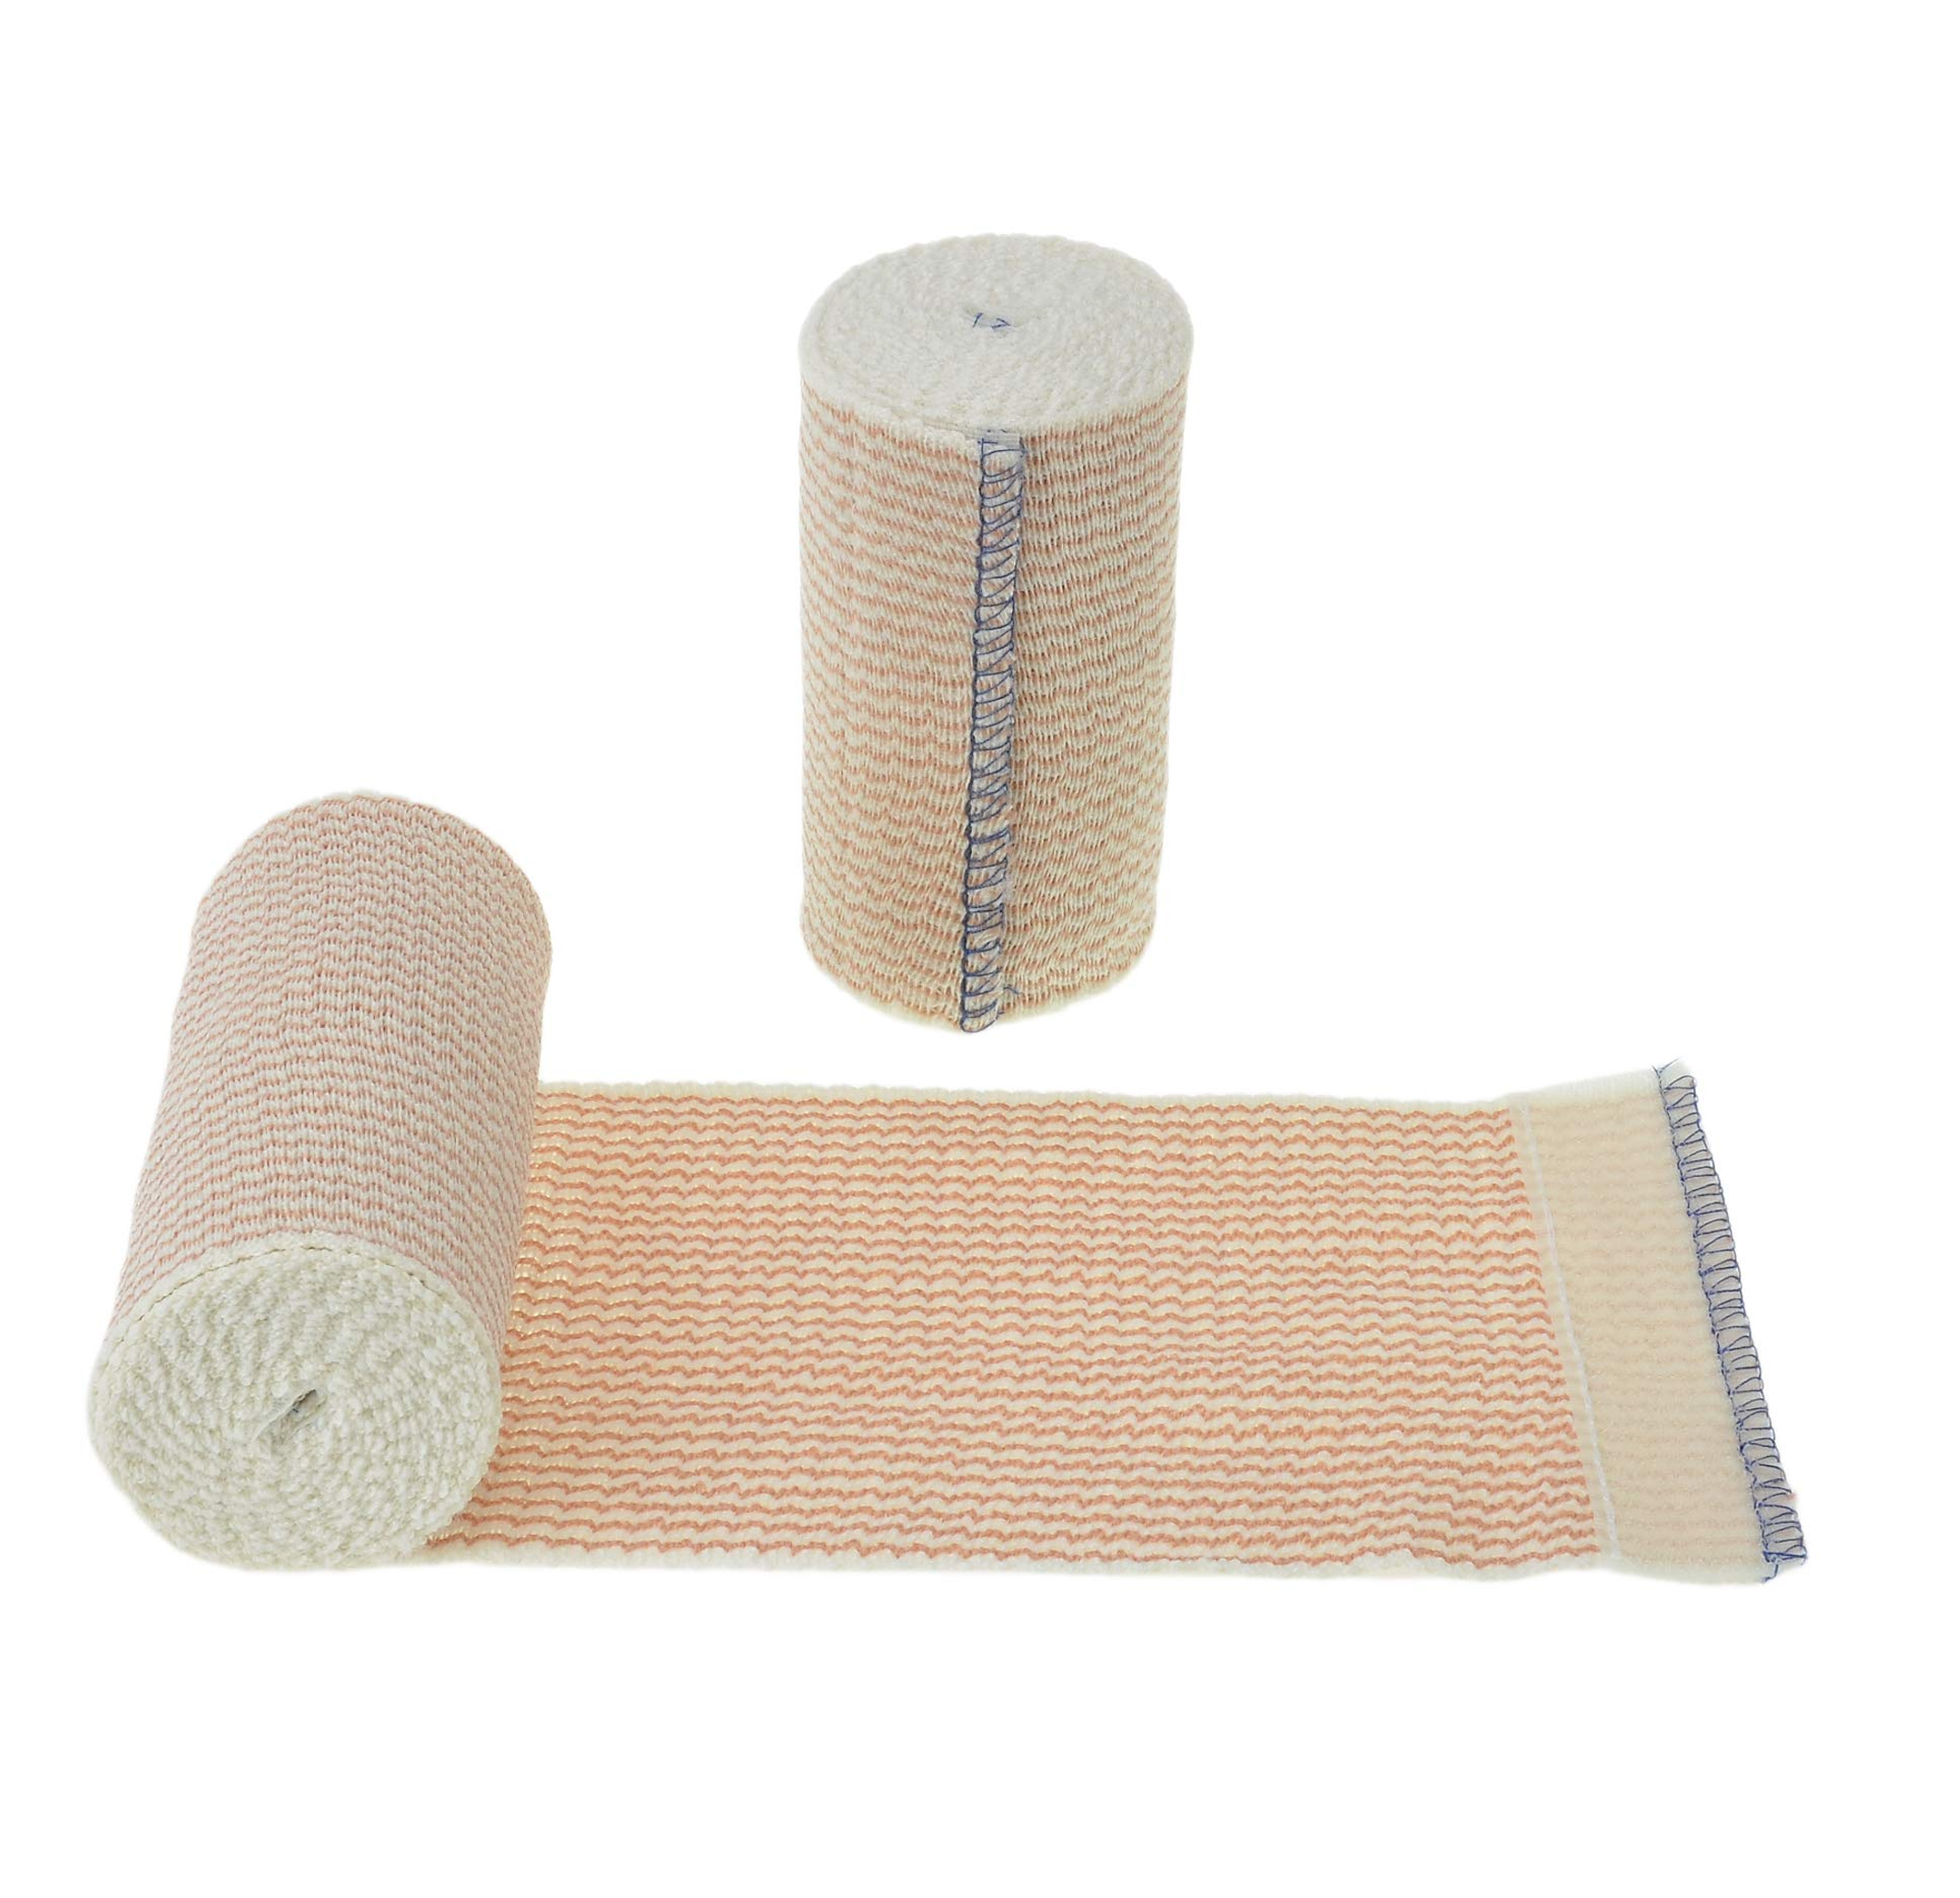 Wound Protection Mesh 1